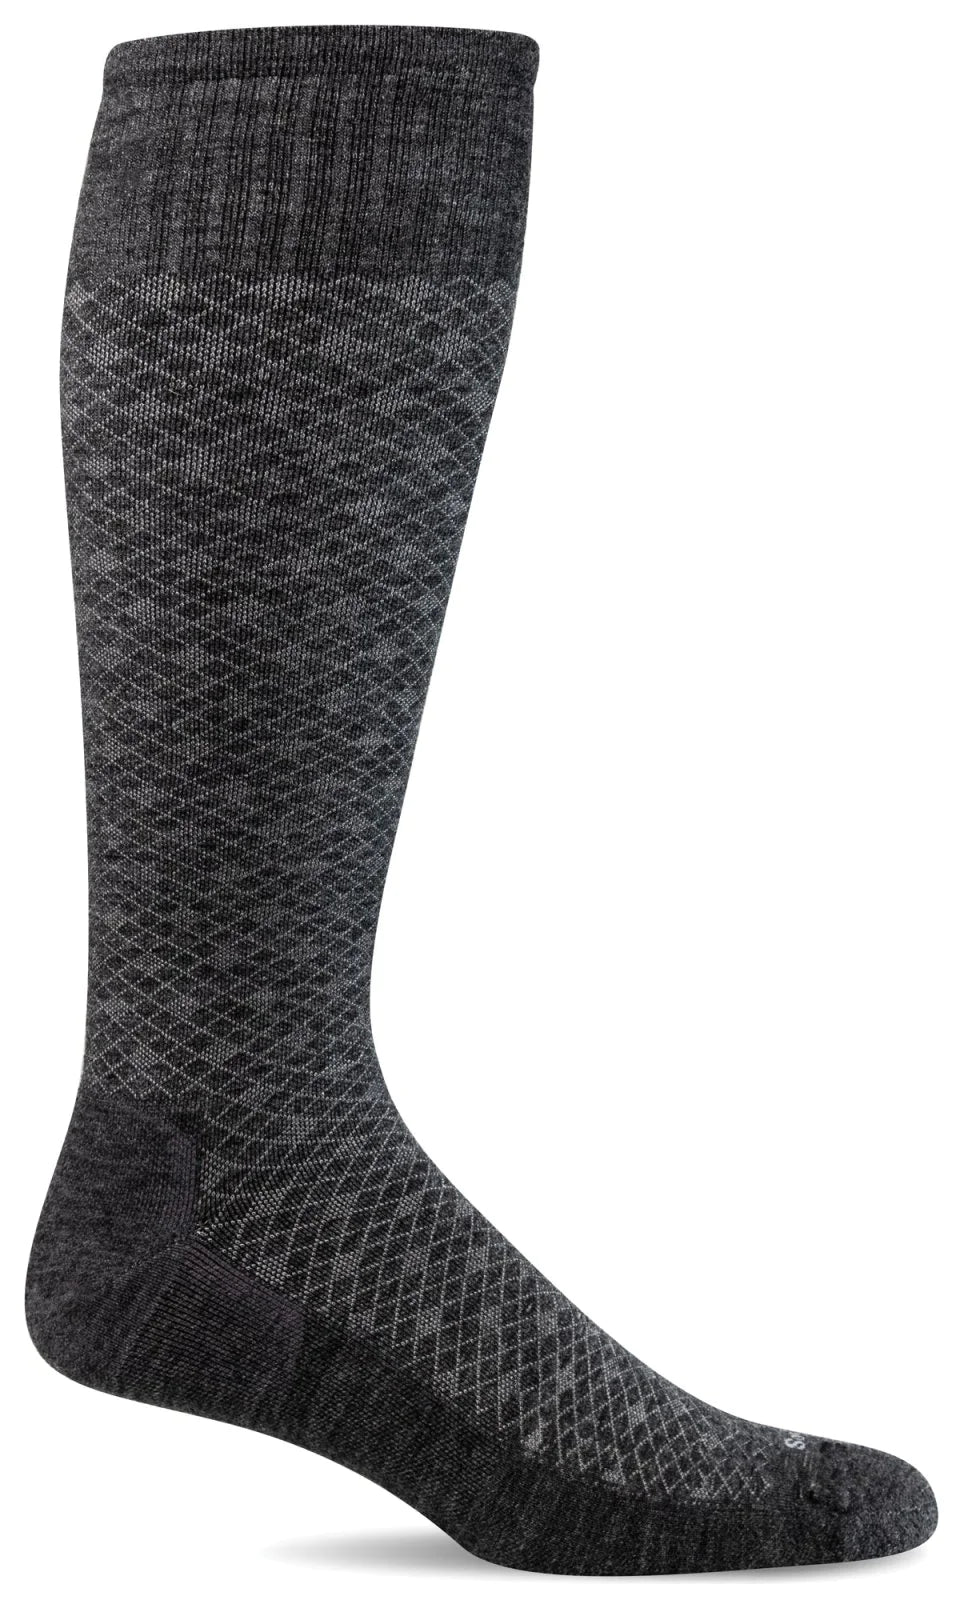 Featherweight Men's Bamboo/Merino Moderate Compression Socks in Khaki or Charcoal